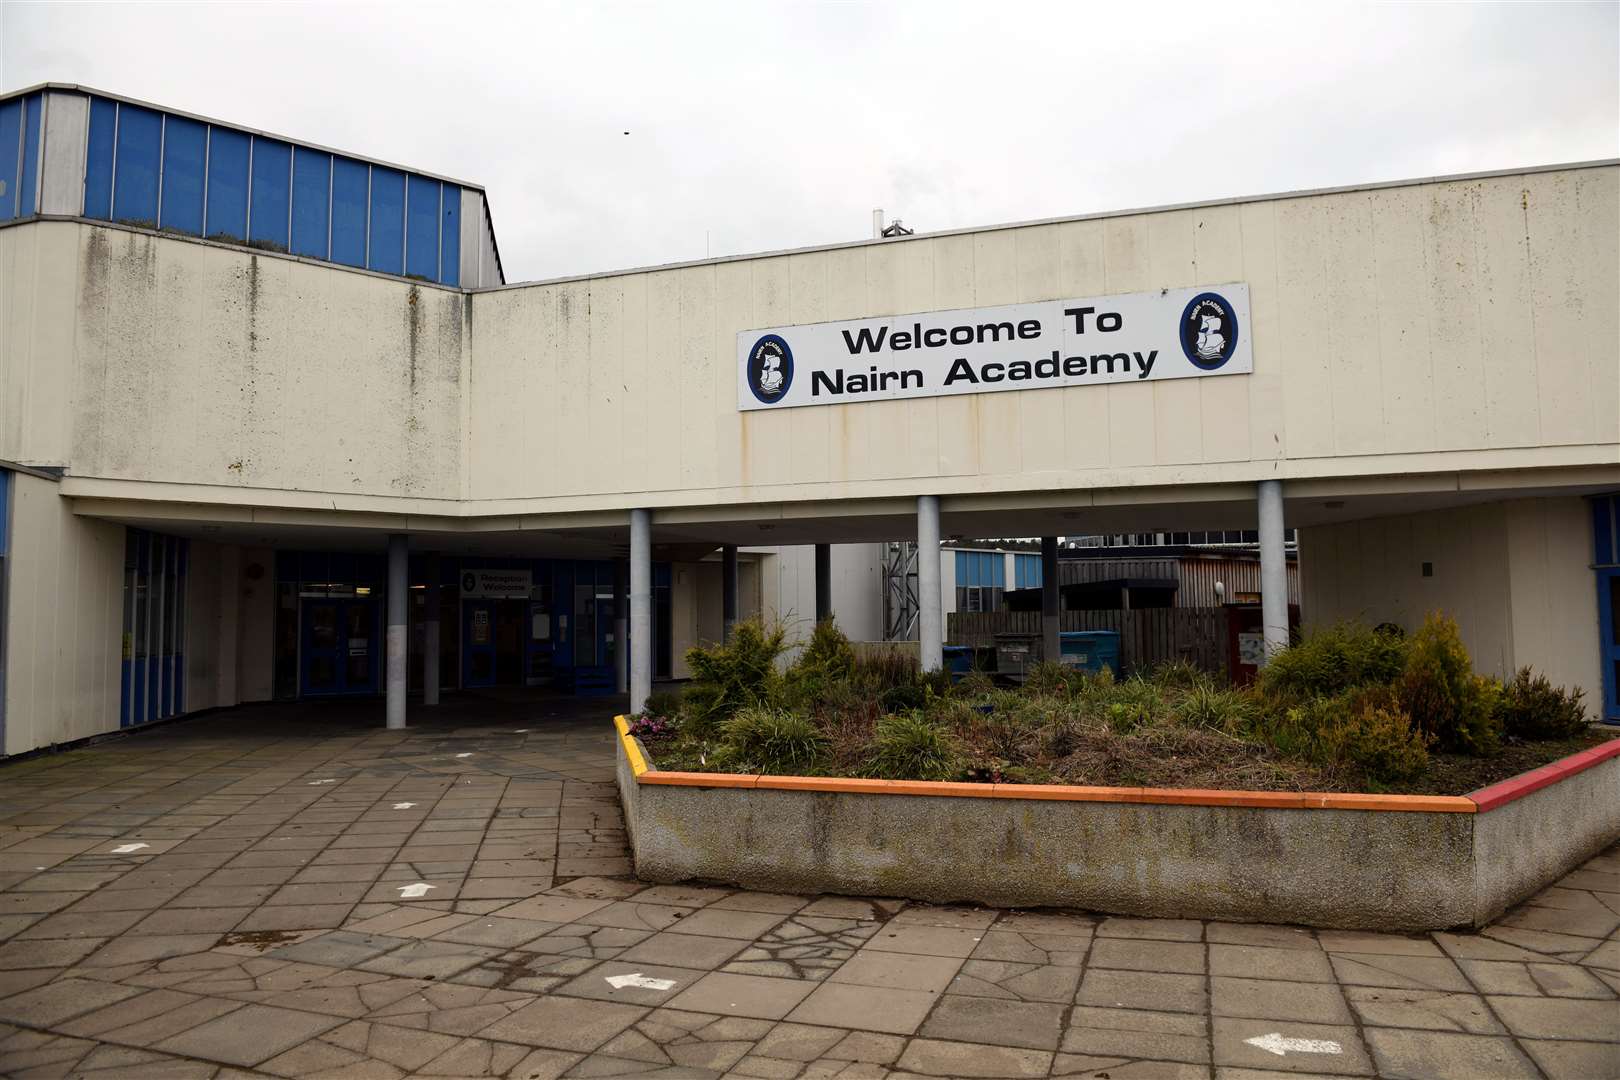 Nairn Academy is one of two Highland schools identified as containing reinforced autoclaved aerated concrete (RAAC).